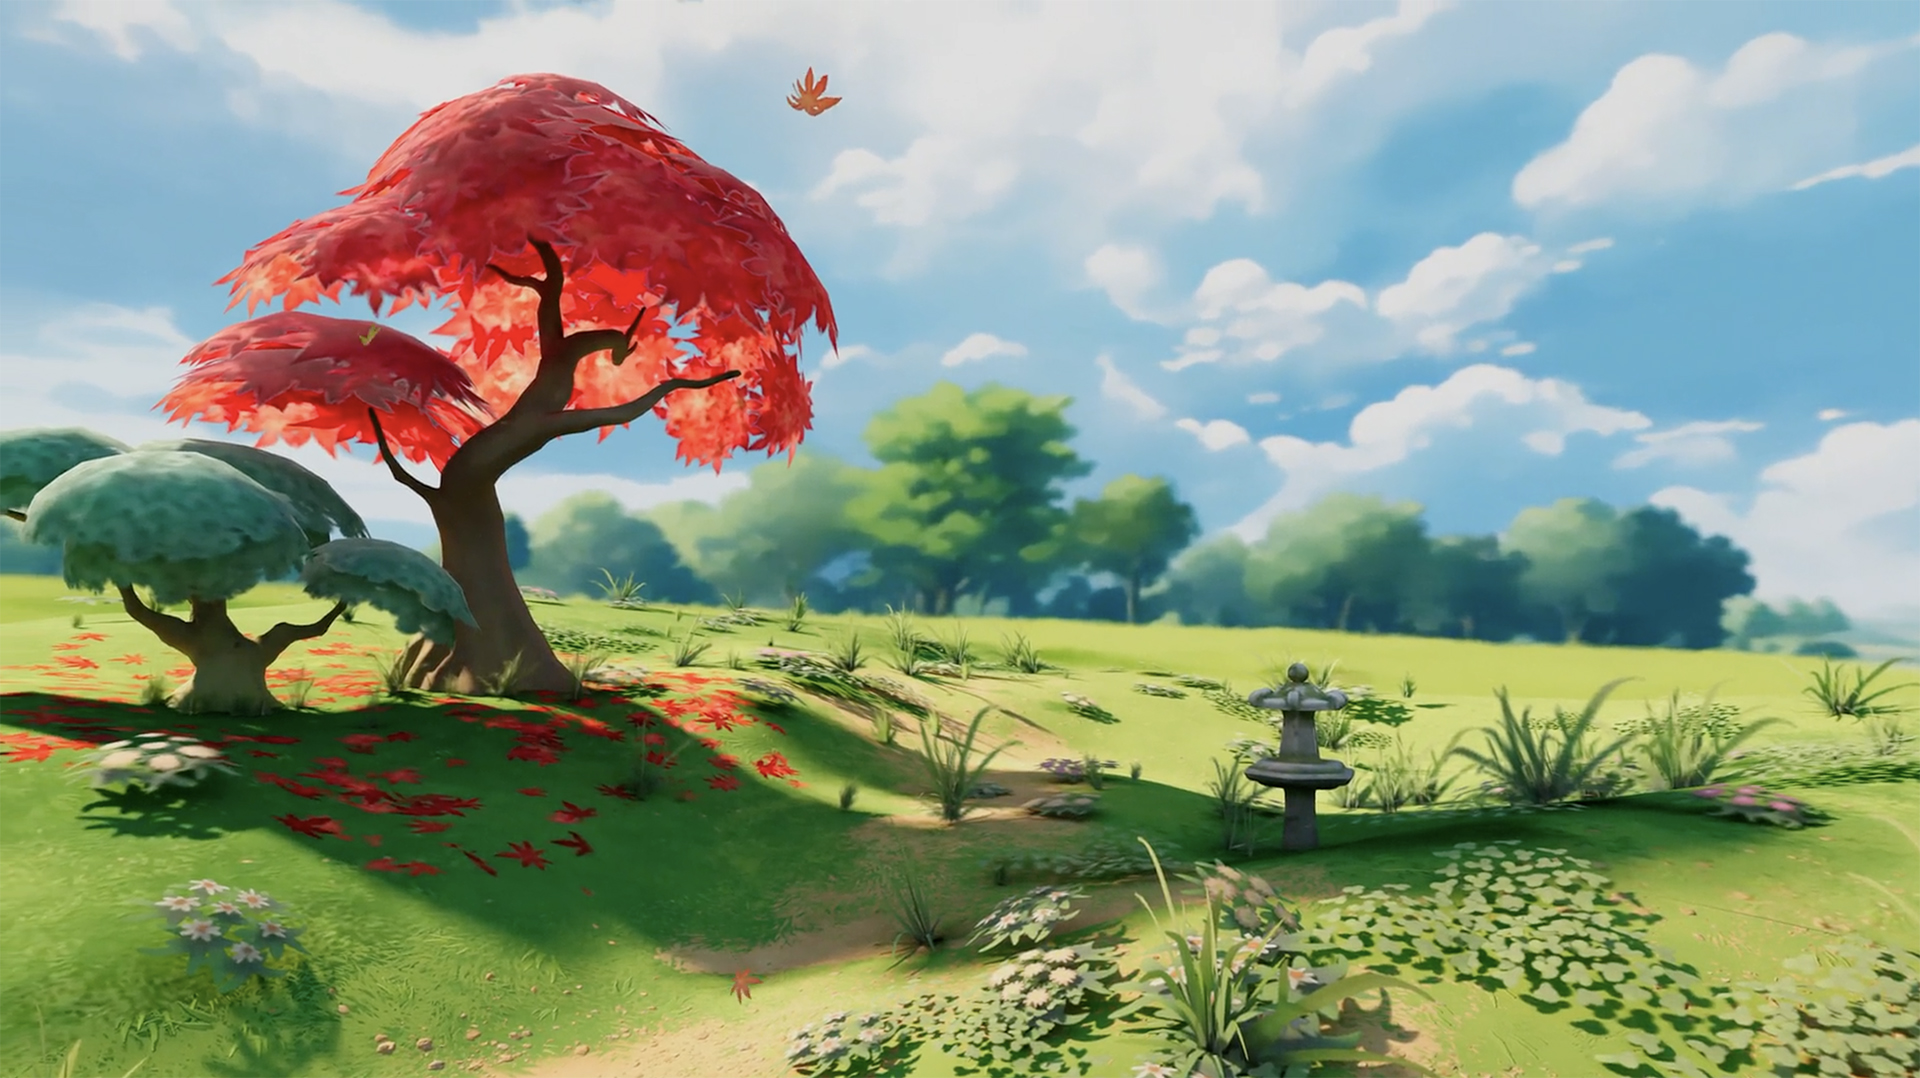 A beautiful garden rendered in created graphics. There's a tree with bright red leaves. A blue sky full of puffy white clouds. Bright green grass, with a path leading by plants and garden sculpture. It's a world created in WebXR.